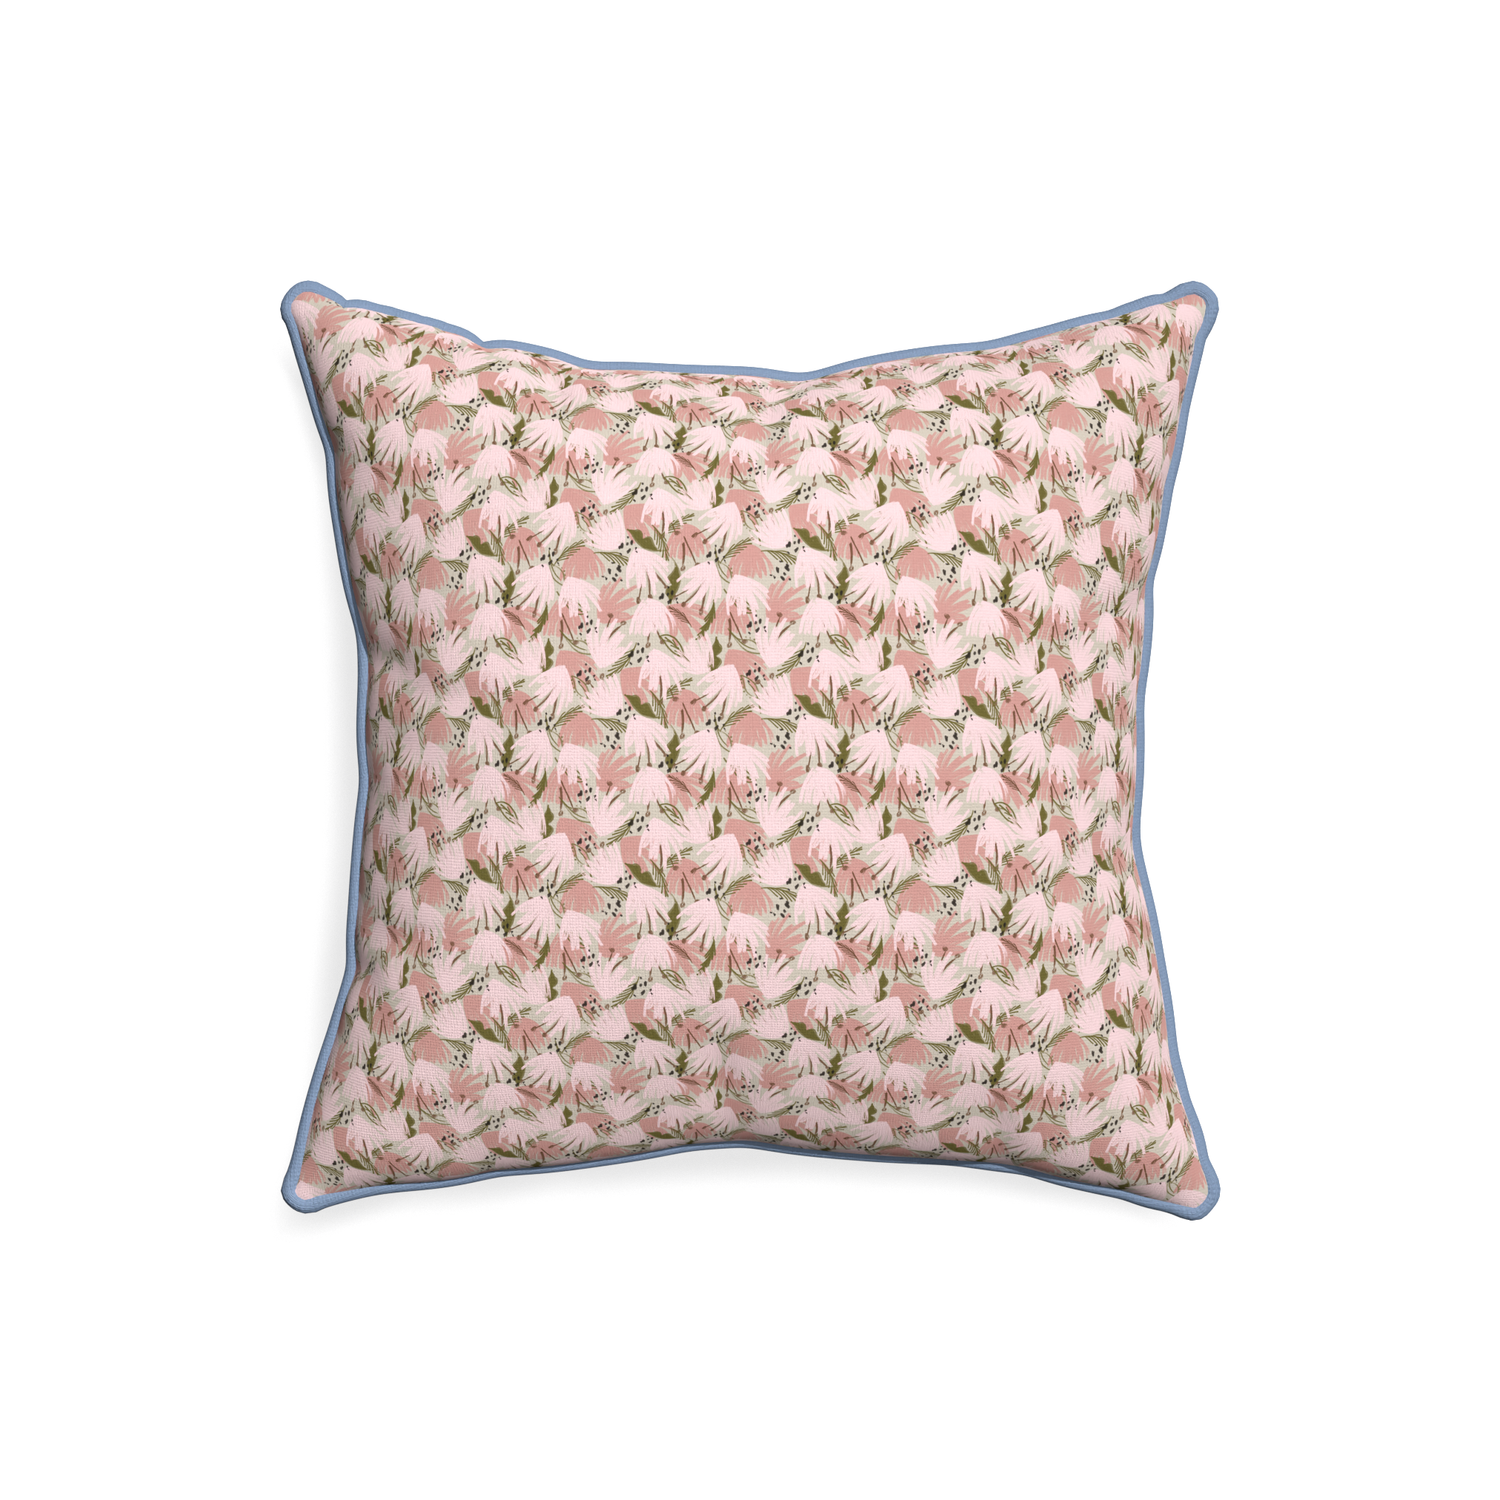 20-square eden pink custom pillow with sky piping on white background